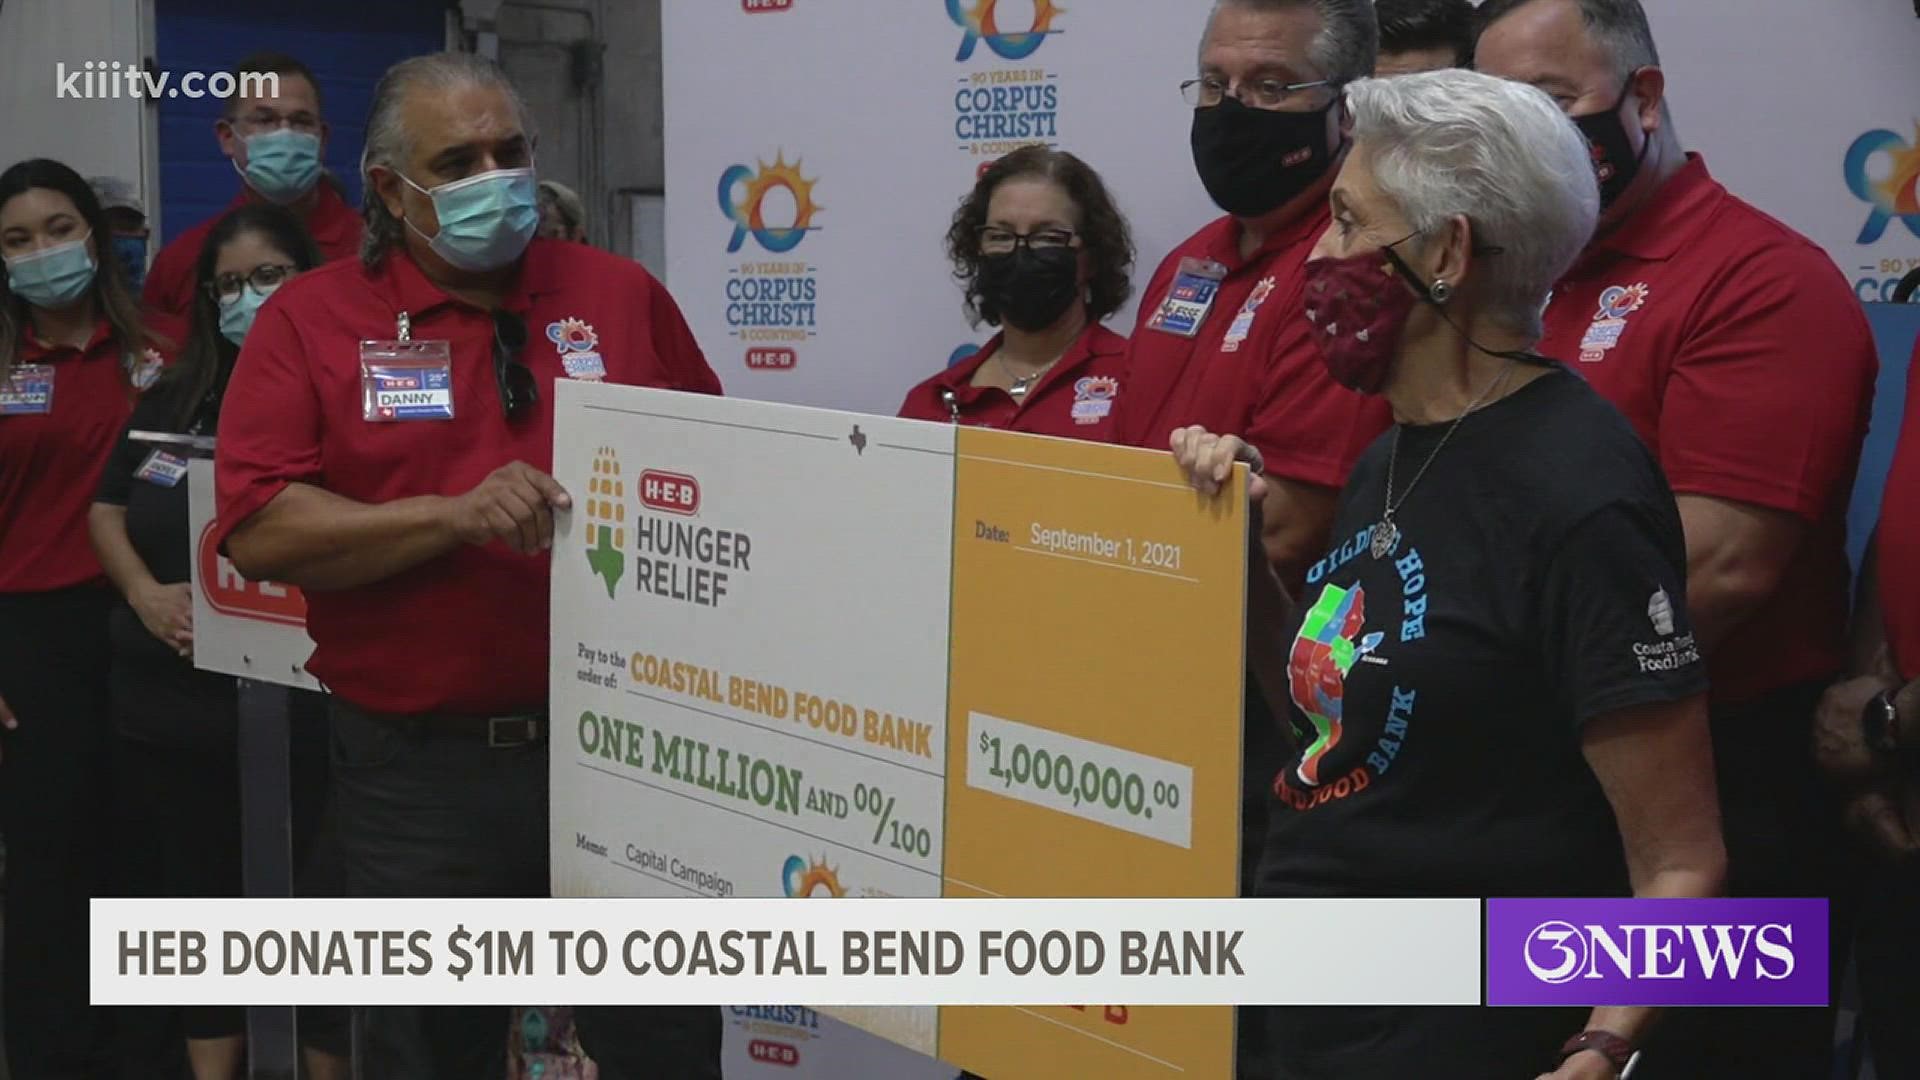 H-E-B made it a little easier Wednesday for the Coastal Bend Food Bank to meet the needs of the community.